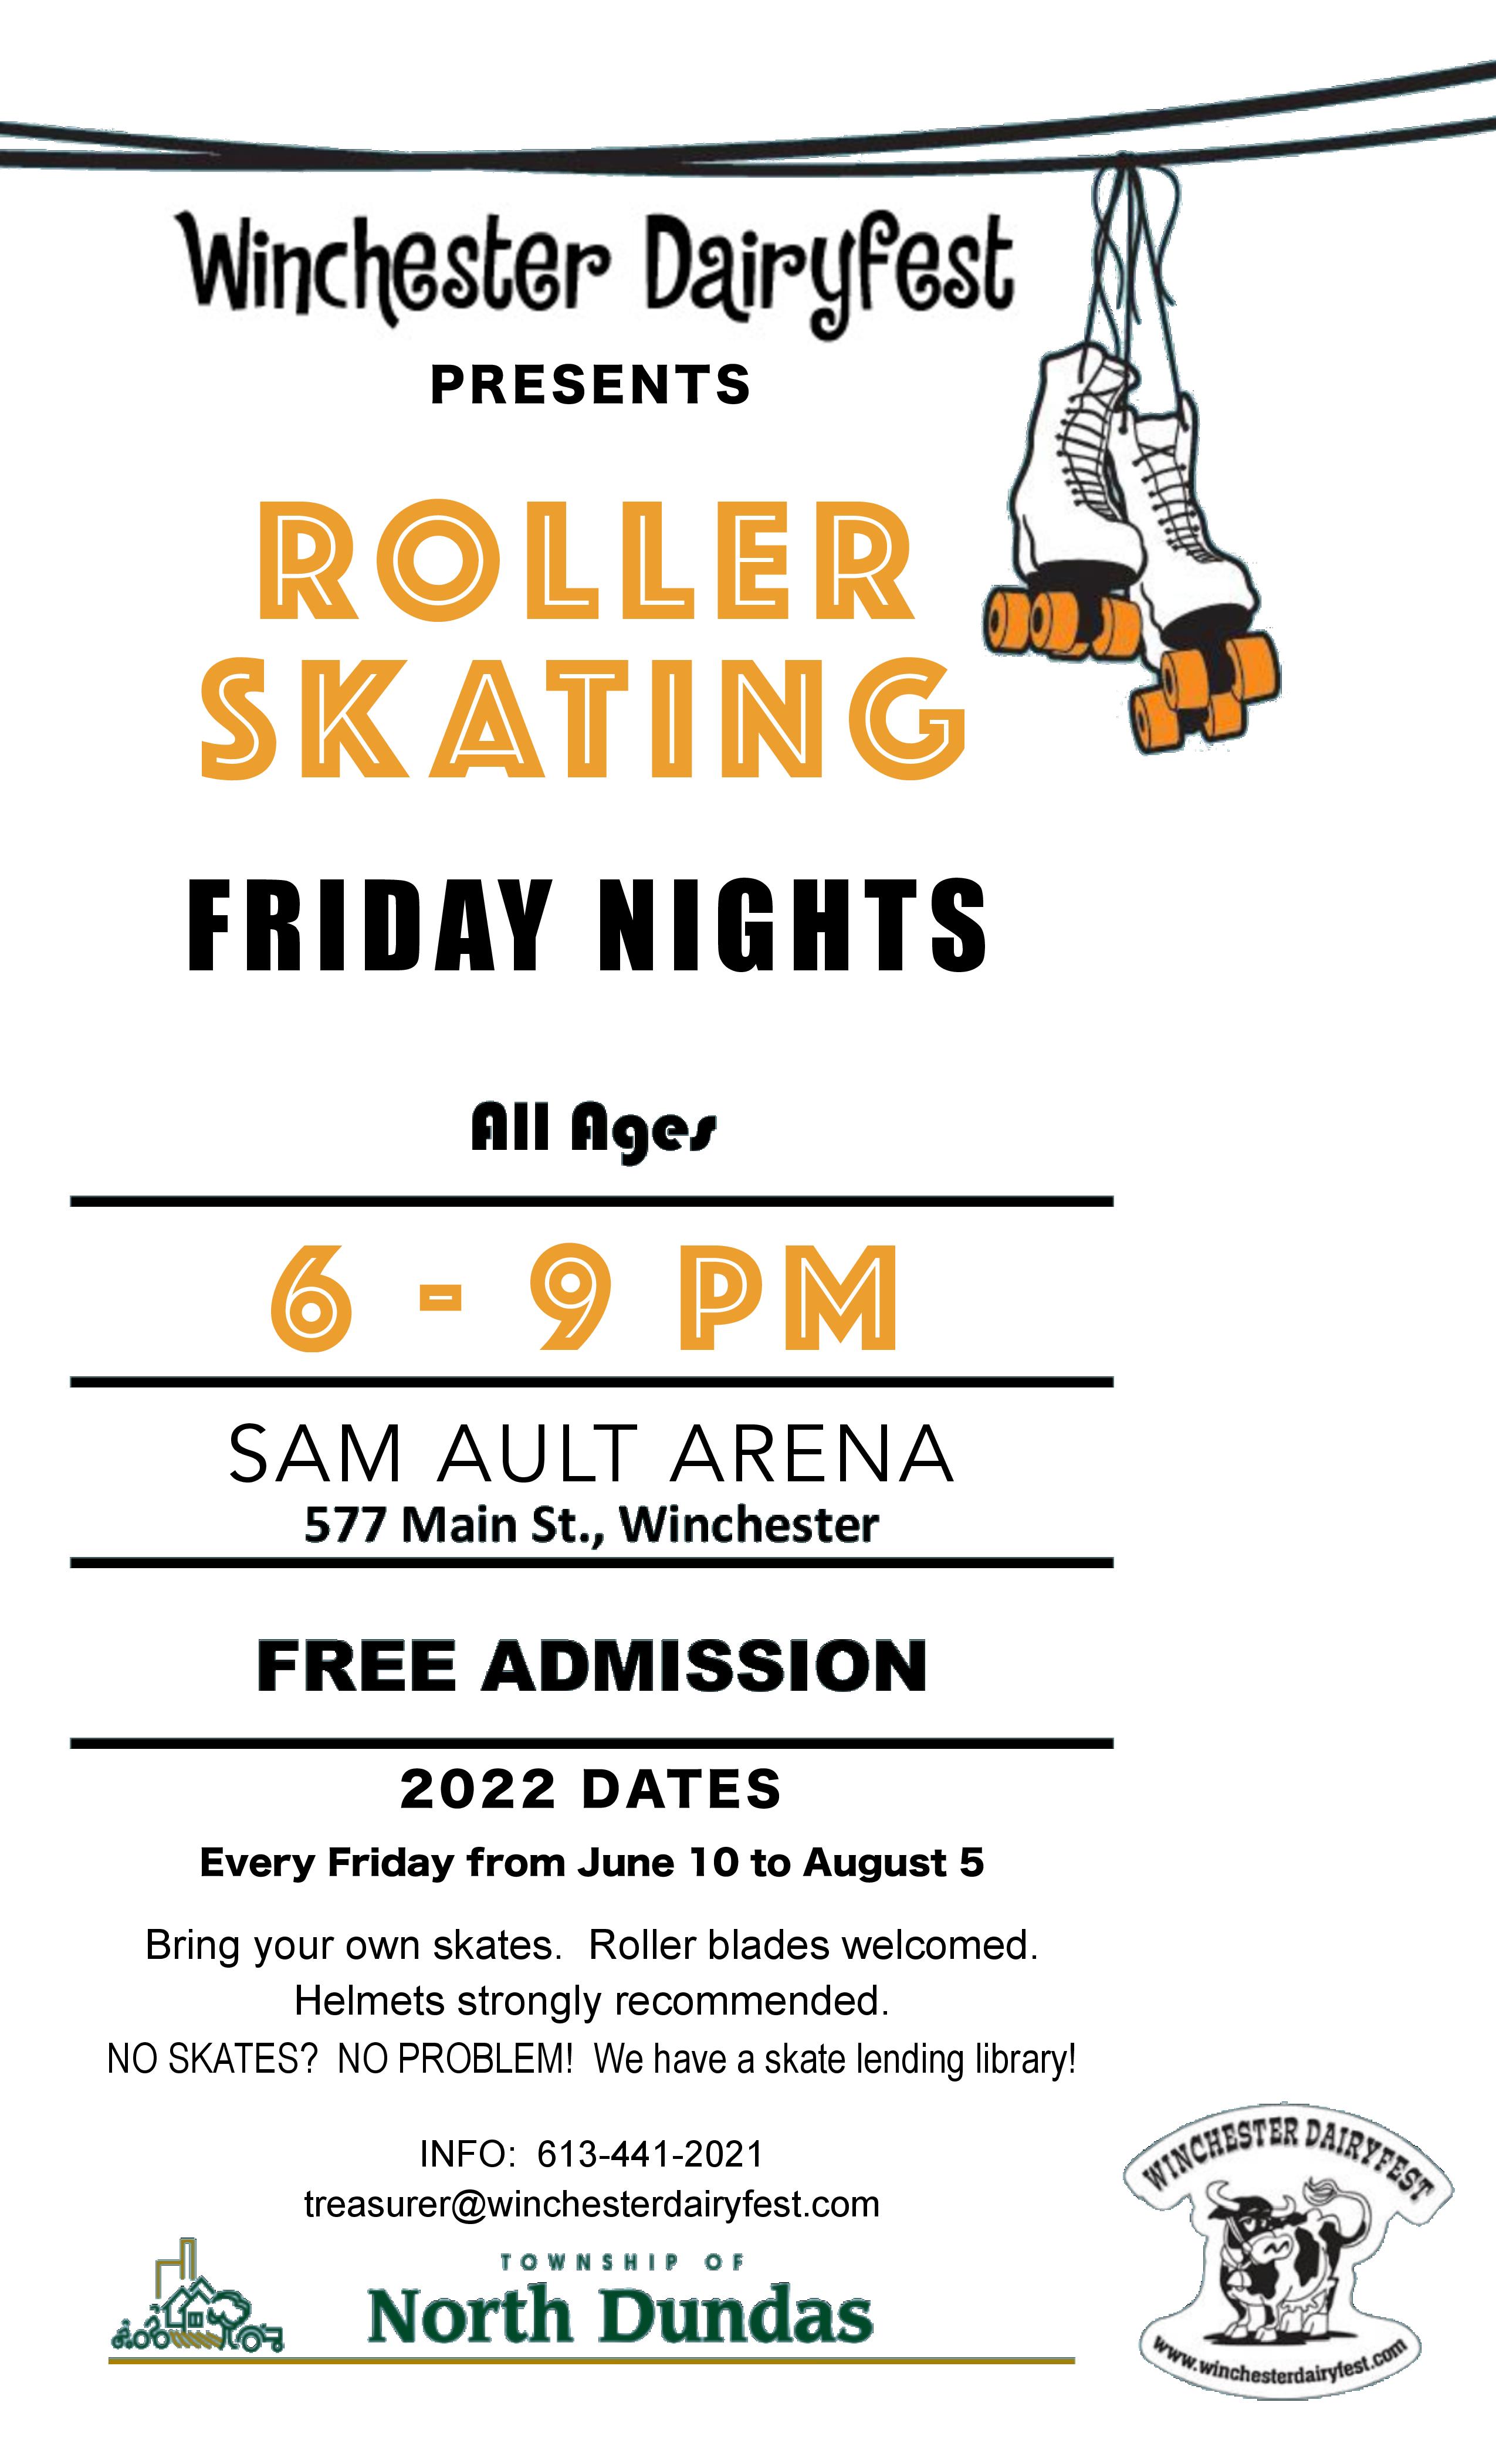 Roller Skating Poster showing text and roller skates